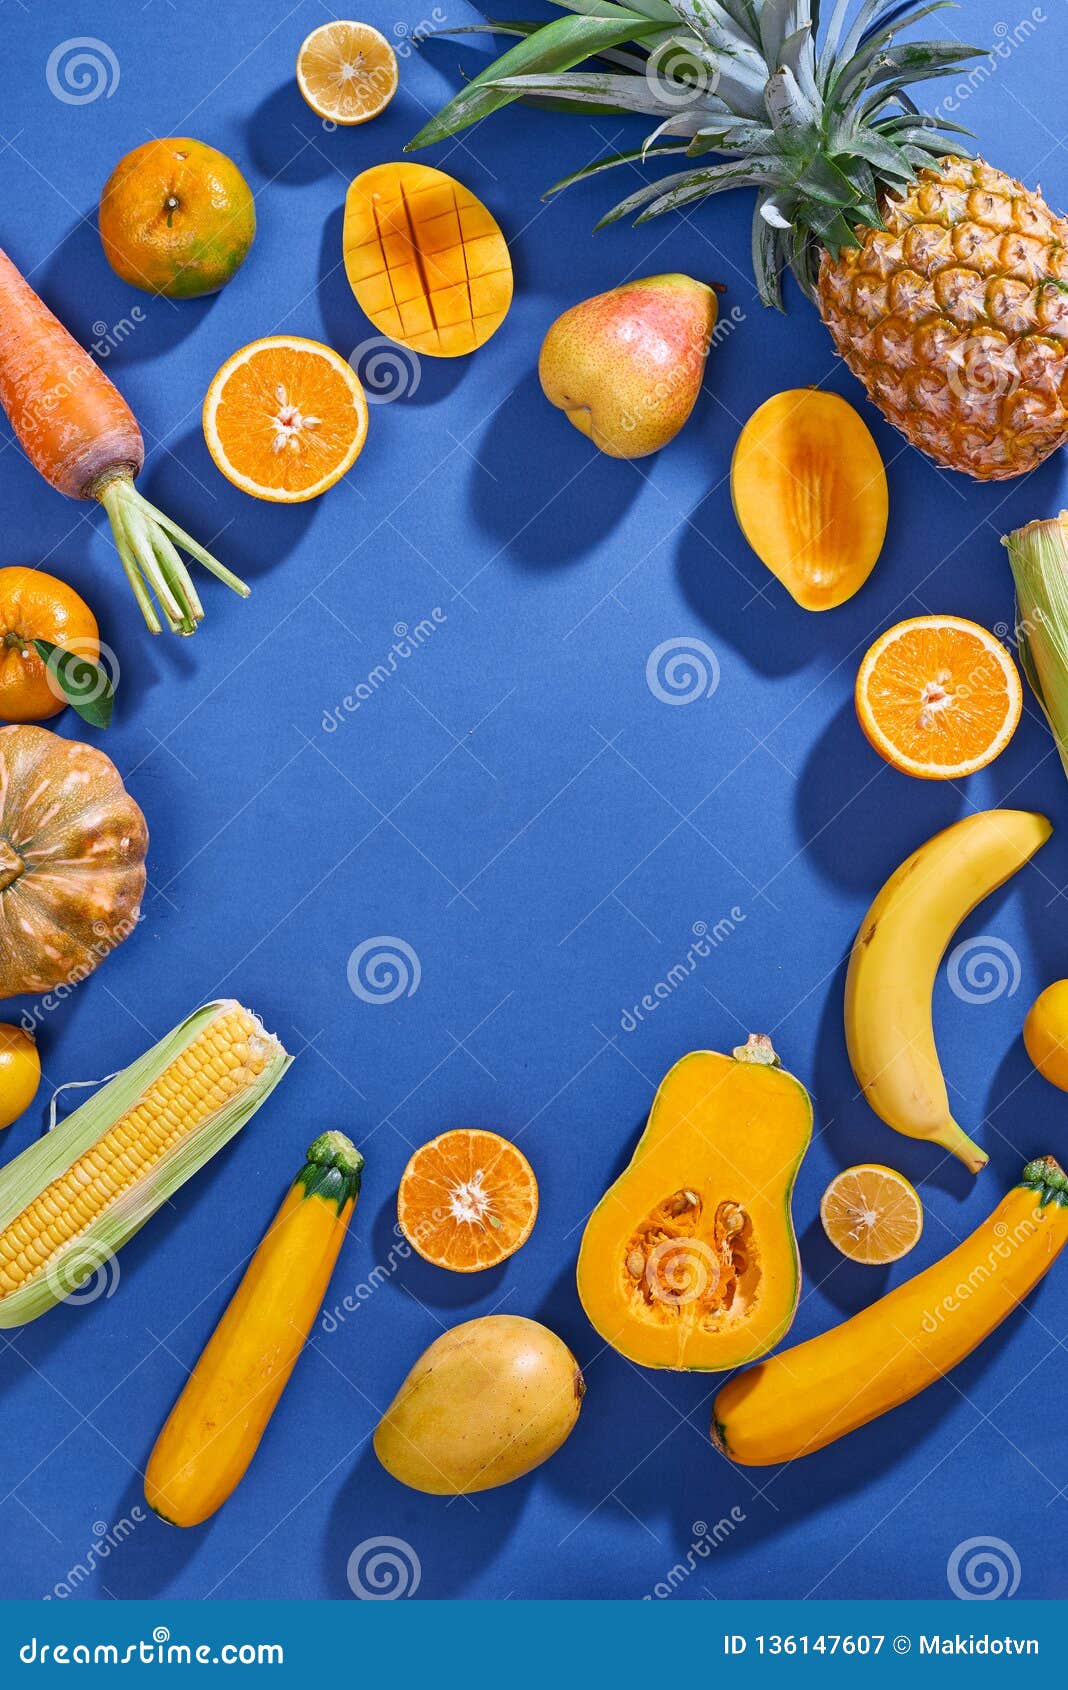 Collection Of Fresh Yellow Fruit And Vegetables On The Blue Background ...